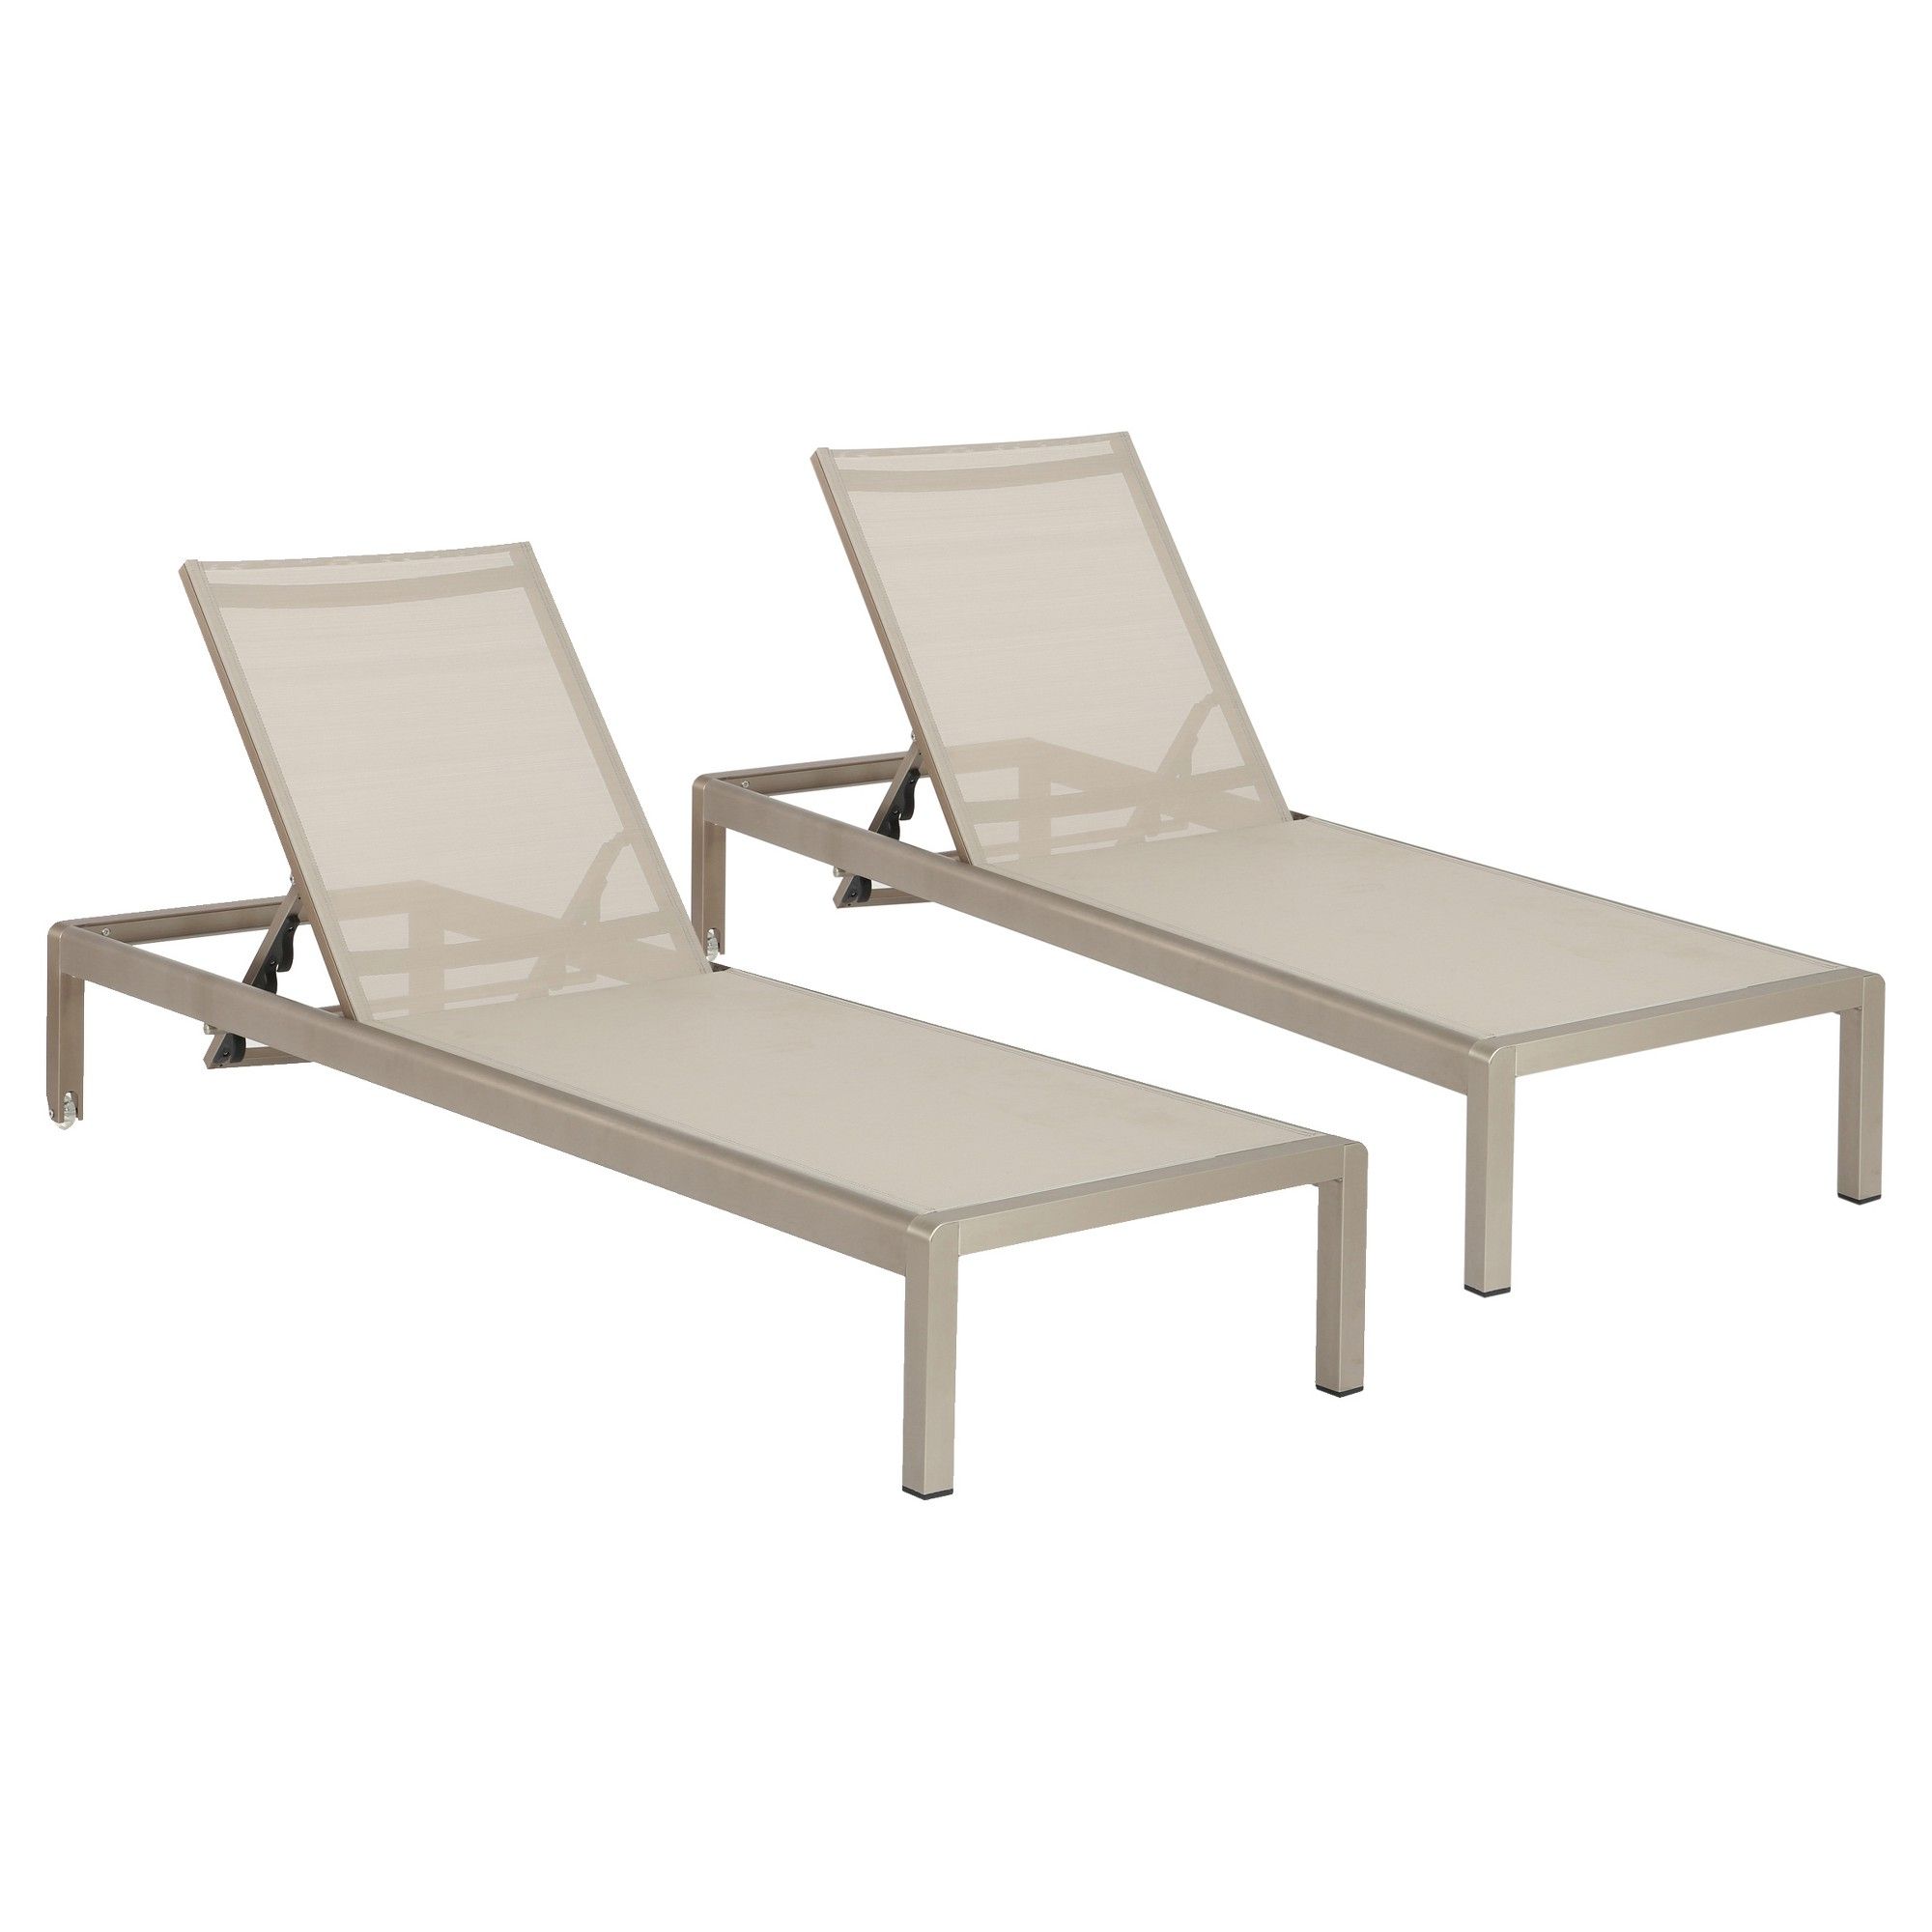 Cape Coral Set Of 2 Outdoor Mesh Chaise Lounges – Gray With Widely Used Cape Coral Outdoor Aluminum Mesh Chaise Lounges (View 8 of 25)